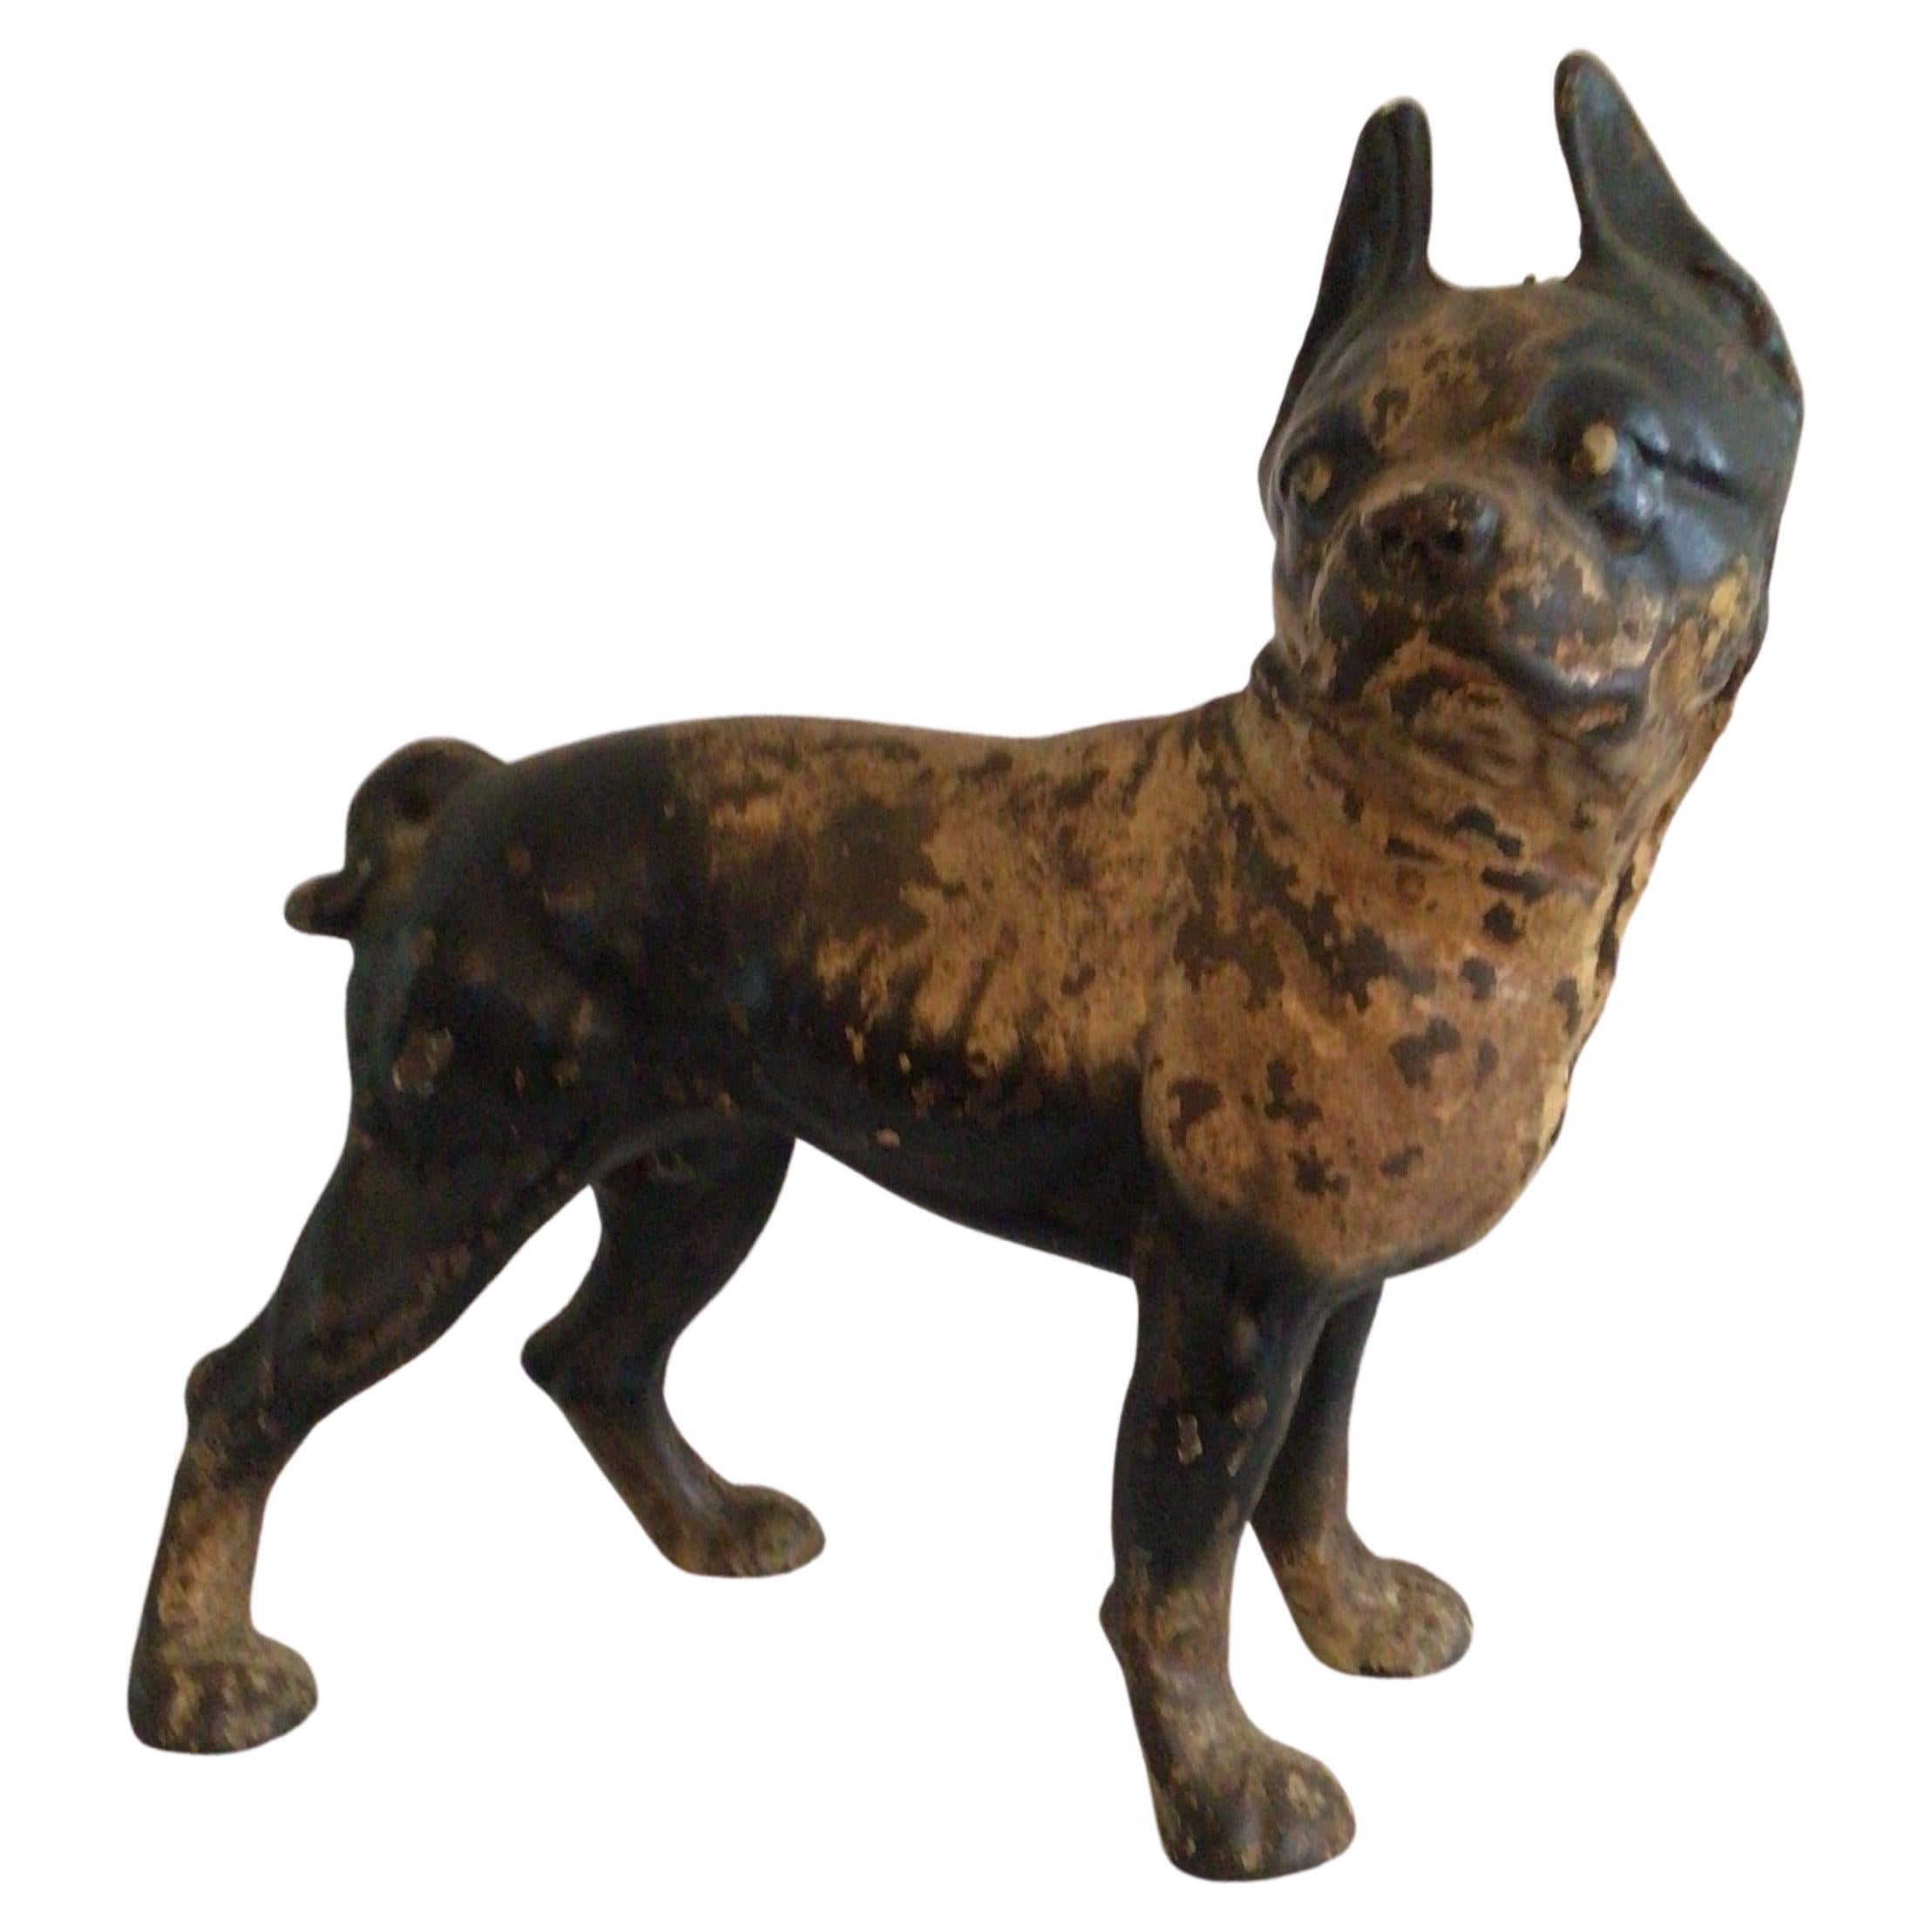 1940s Painted Cast Iron Metal Sculpture of Boston Terrier